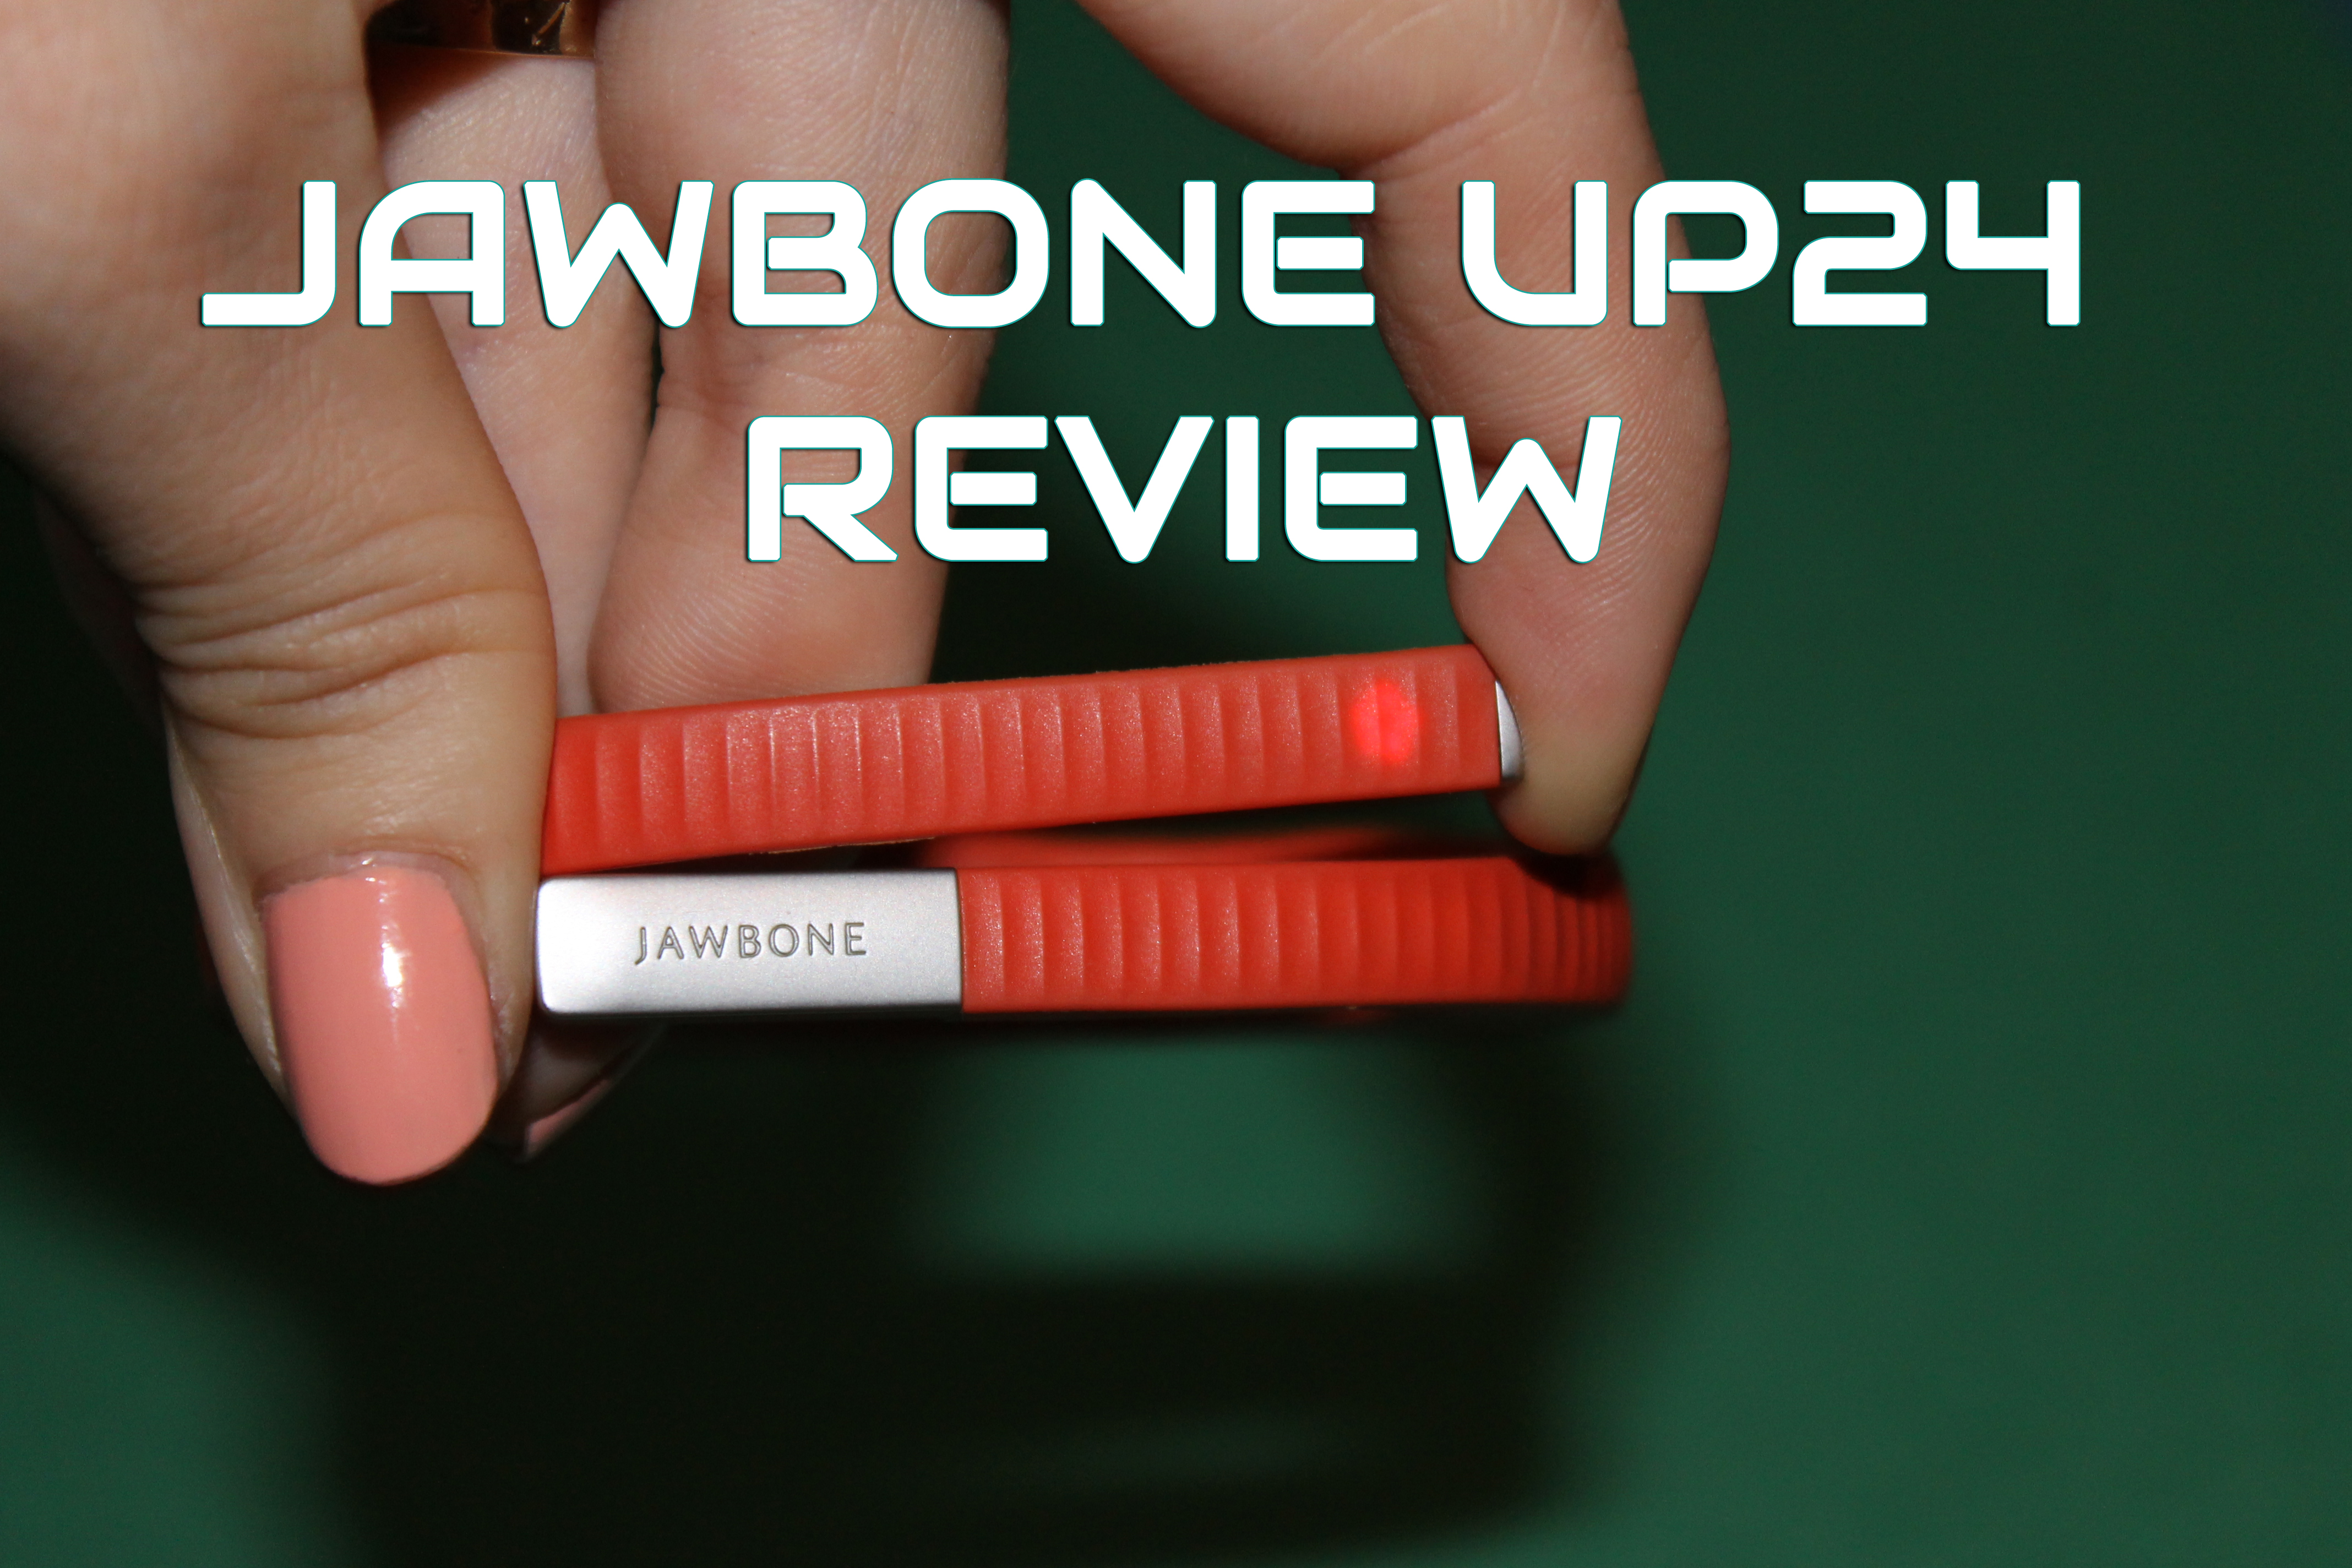 Jawbone UP 24 Review